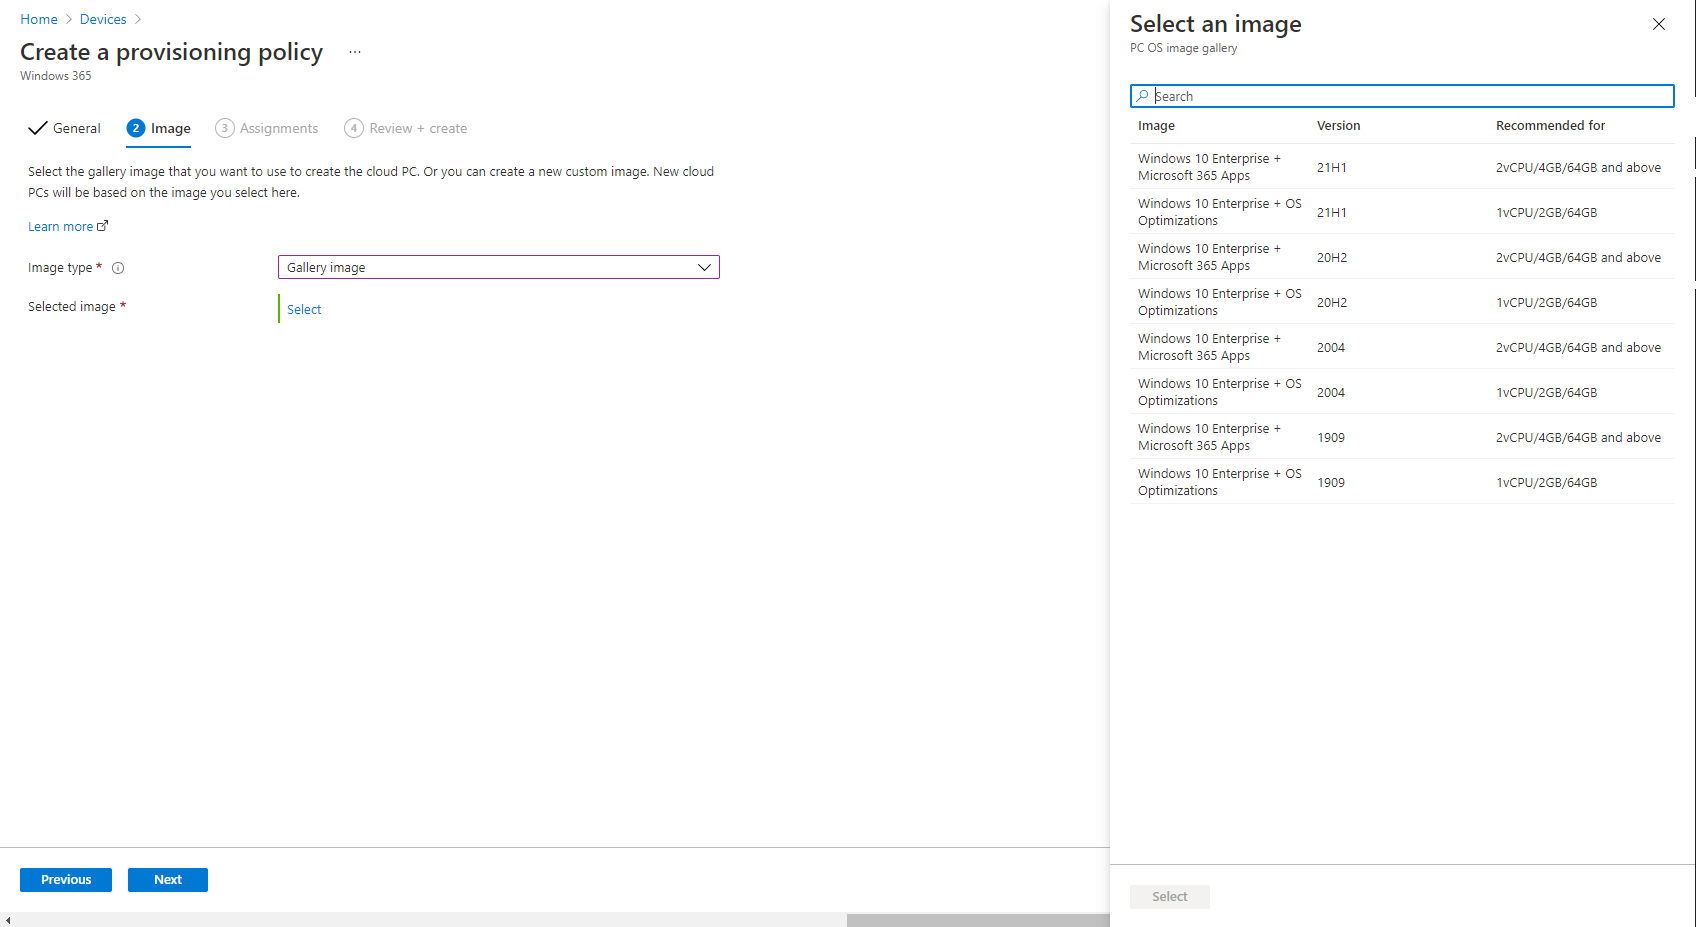 Selecting an image from the gallery in your provisioning profile